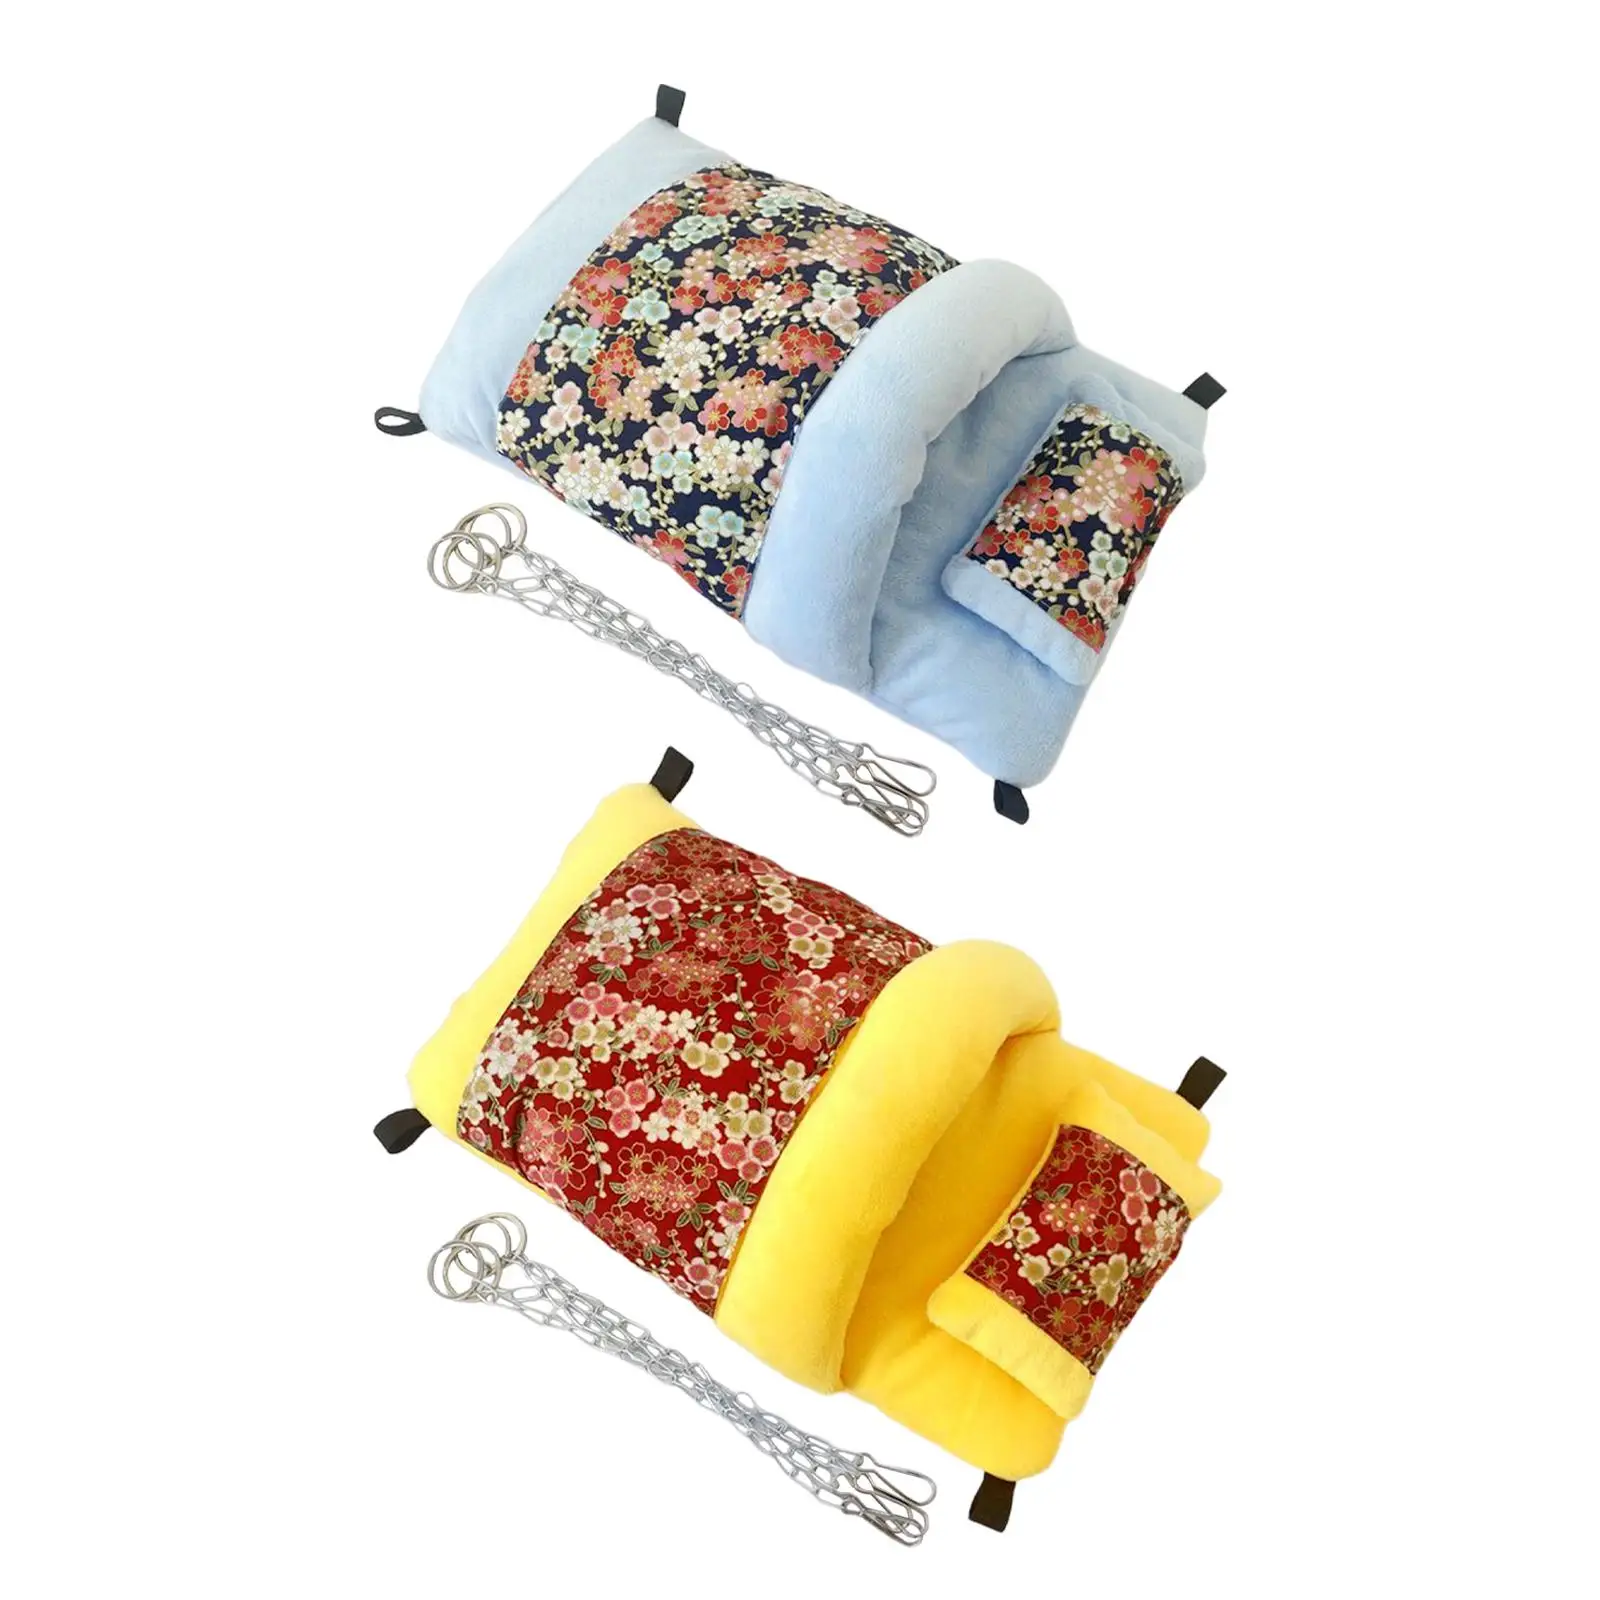 House Sleeping Toys Cage Accessories Bird Bed Hut Parrot Hammock Bed for Cockatoo Hamster Budgie Lovebird Macaw